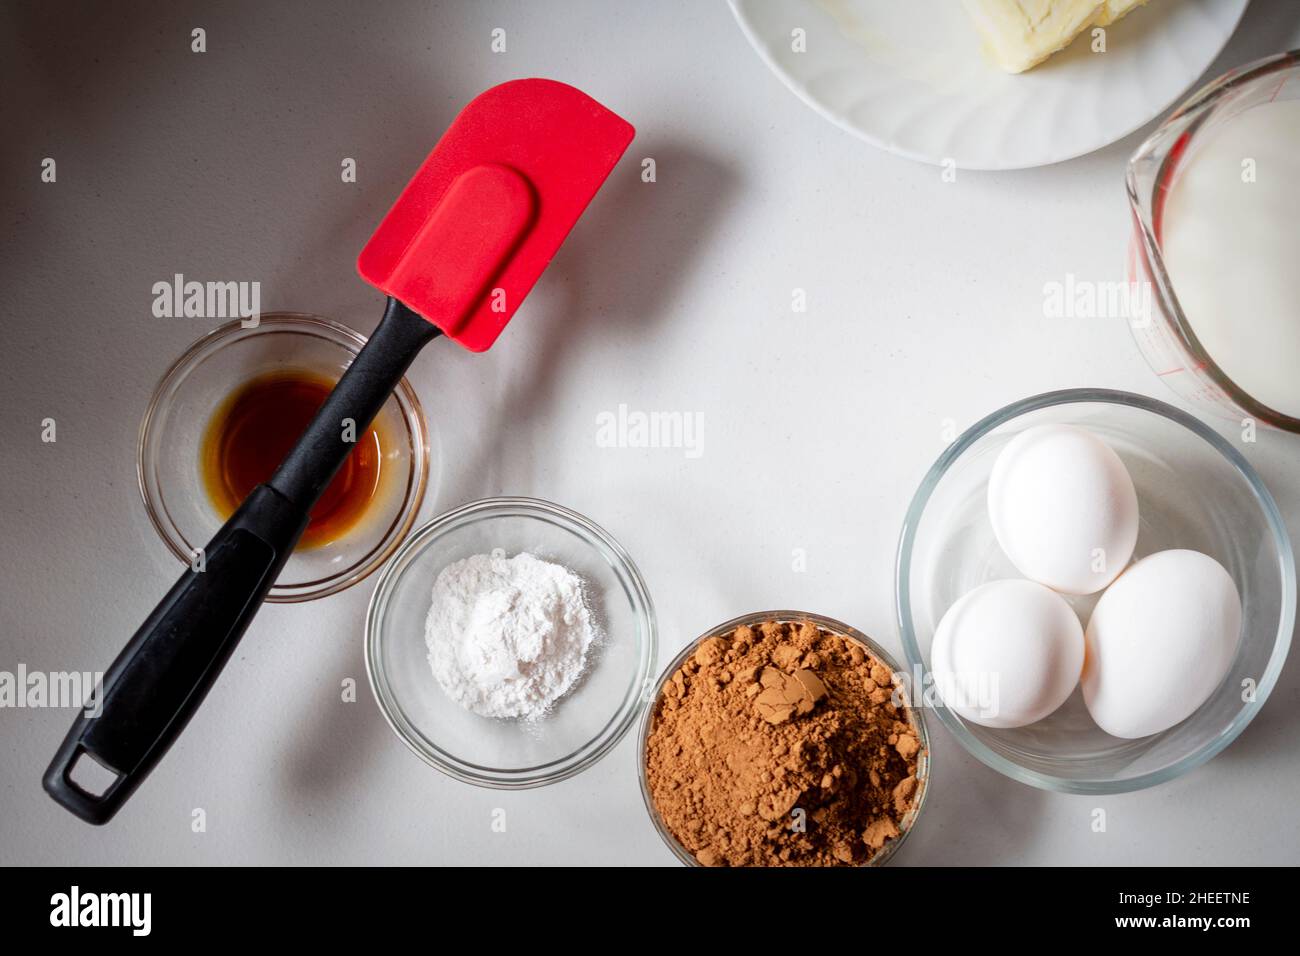 Looking down on some of the ingredients for baking a basic chocolate cake.  Ingredients include butter, milk, eggs, cocoa, baking powder, and vanilla. Stock Photo